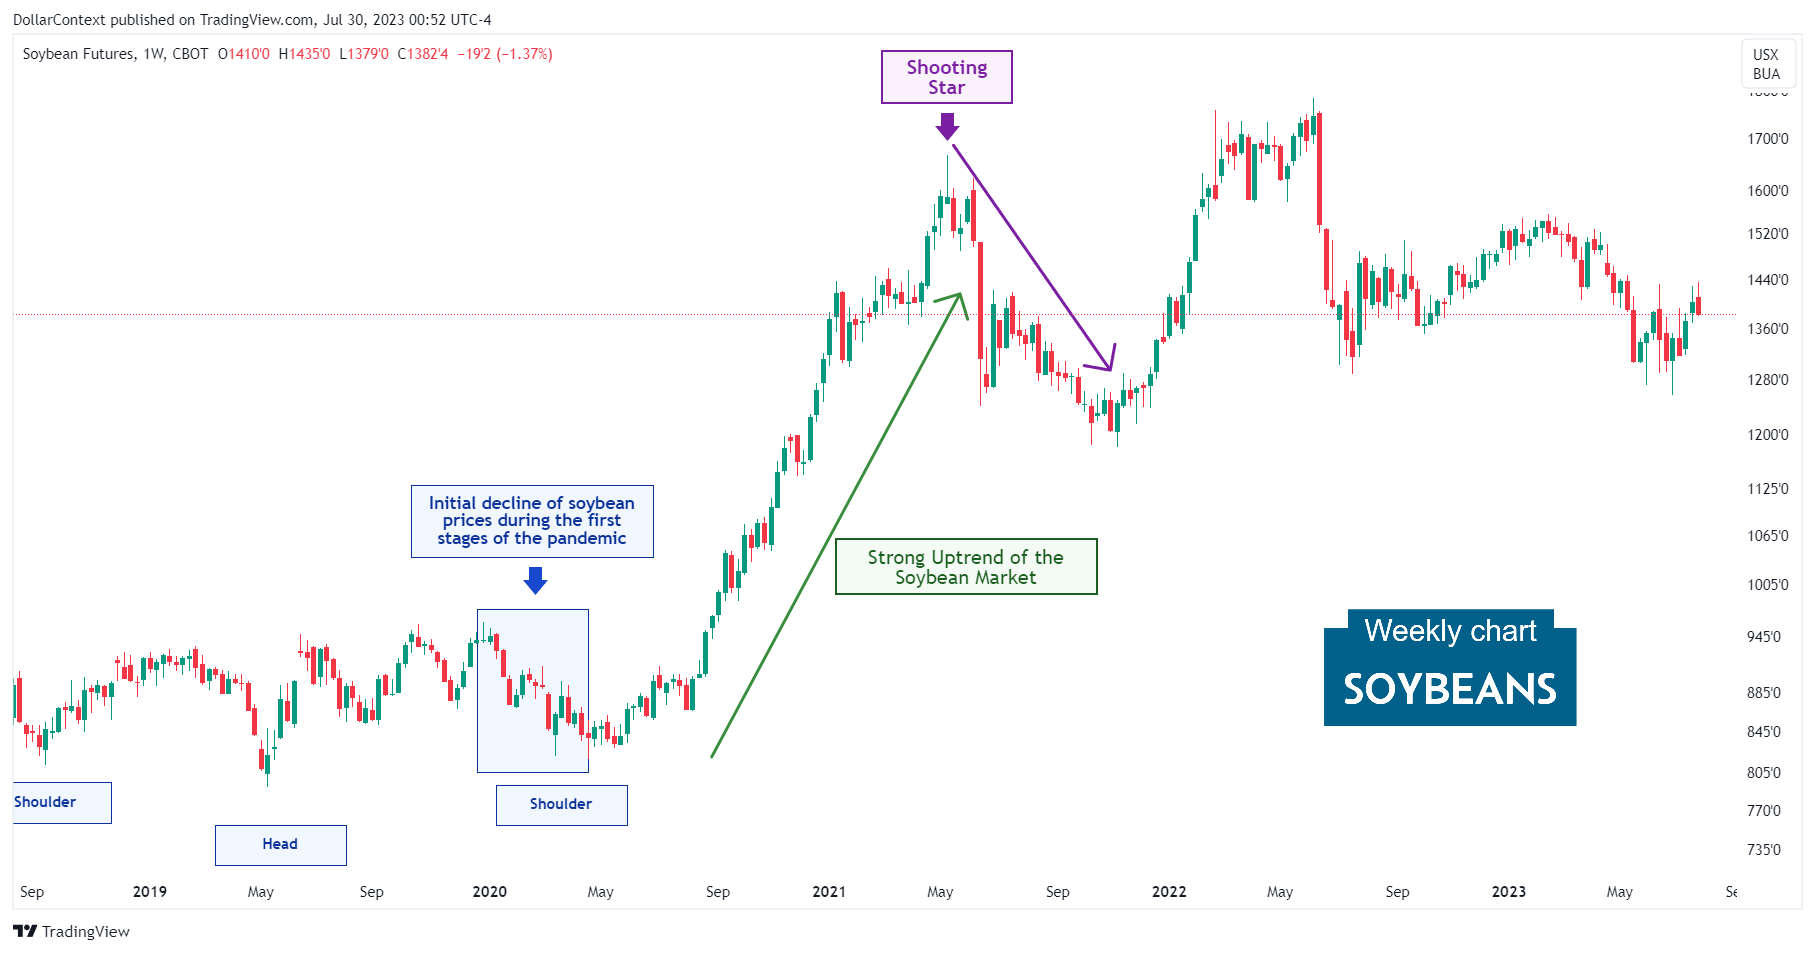 Soybean Futures: The Correction from May to October 2021